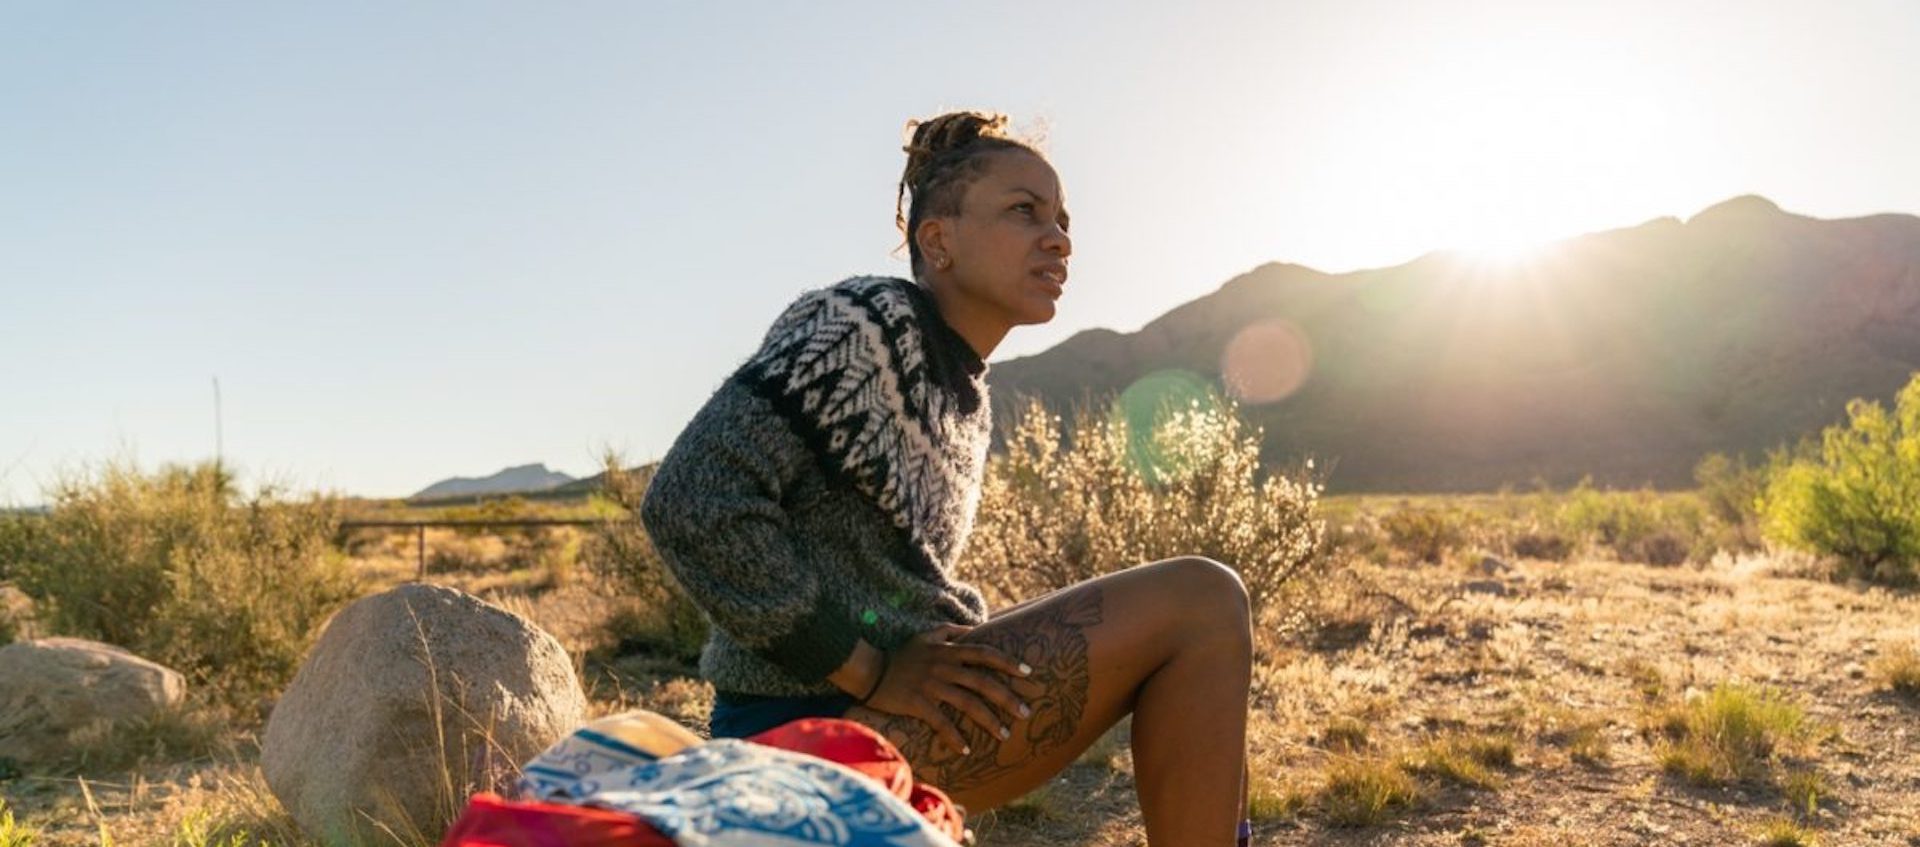 Runner and advocate Faith E. Briggs in Chelsea Jolly and Whitney Hassett's 2019 short film This Land